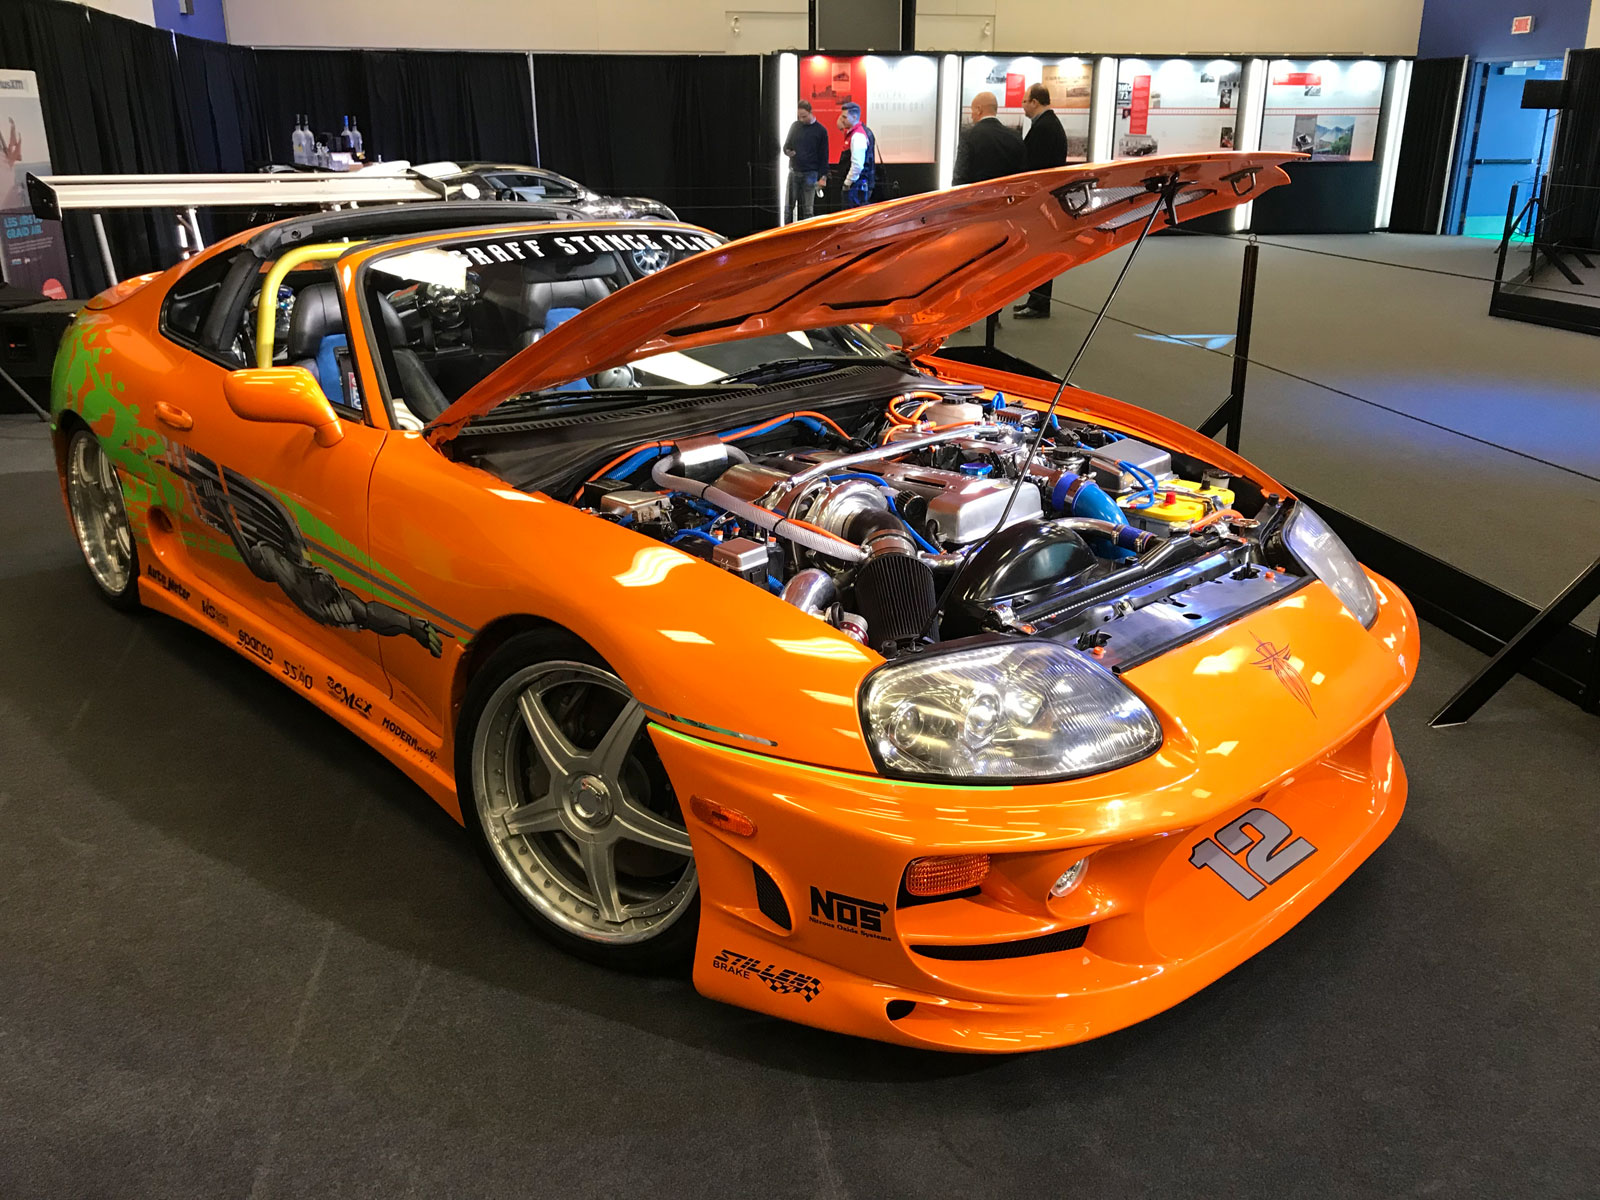 Macadam Goodwill bestrating Interview With Dave Deschenes Who Has Replicated Paul Walker's Toyota Supra  From The Fast And The Furious